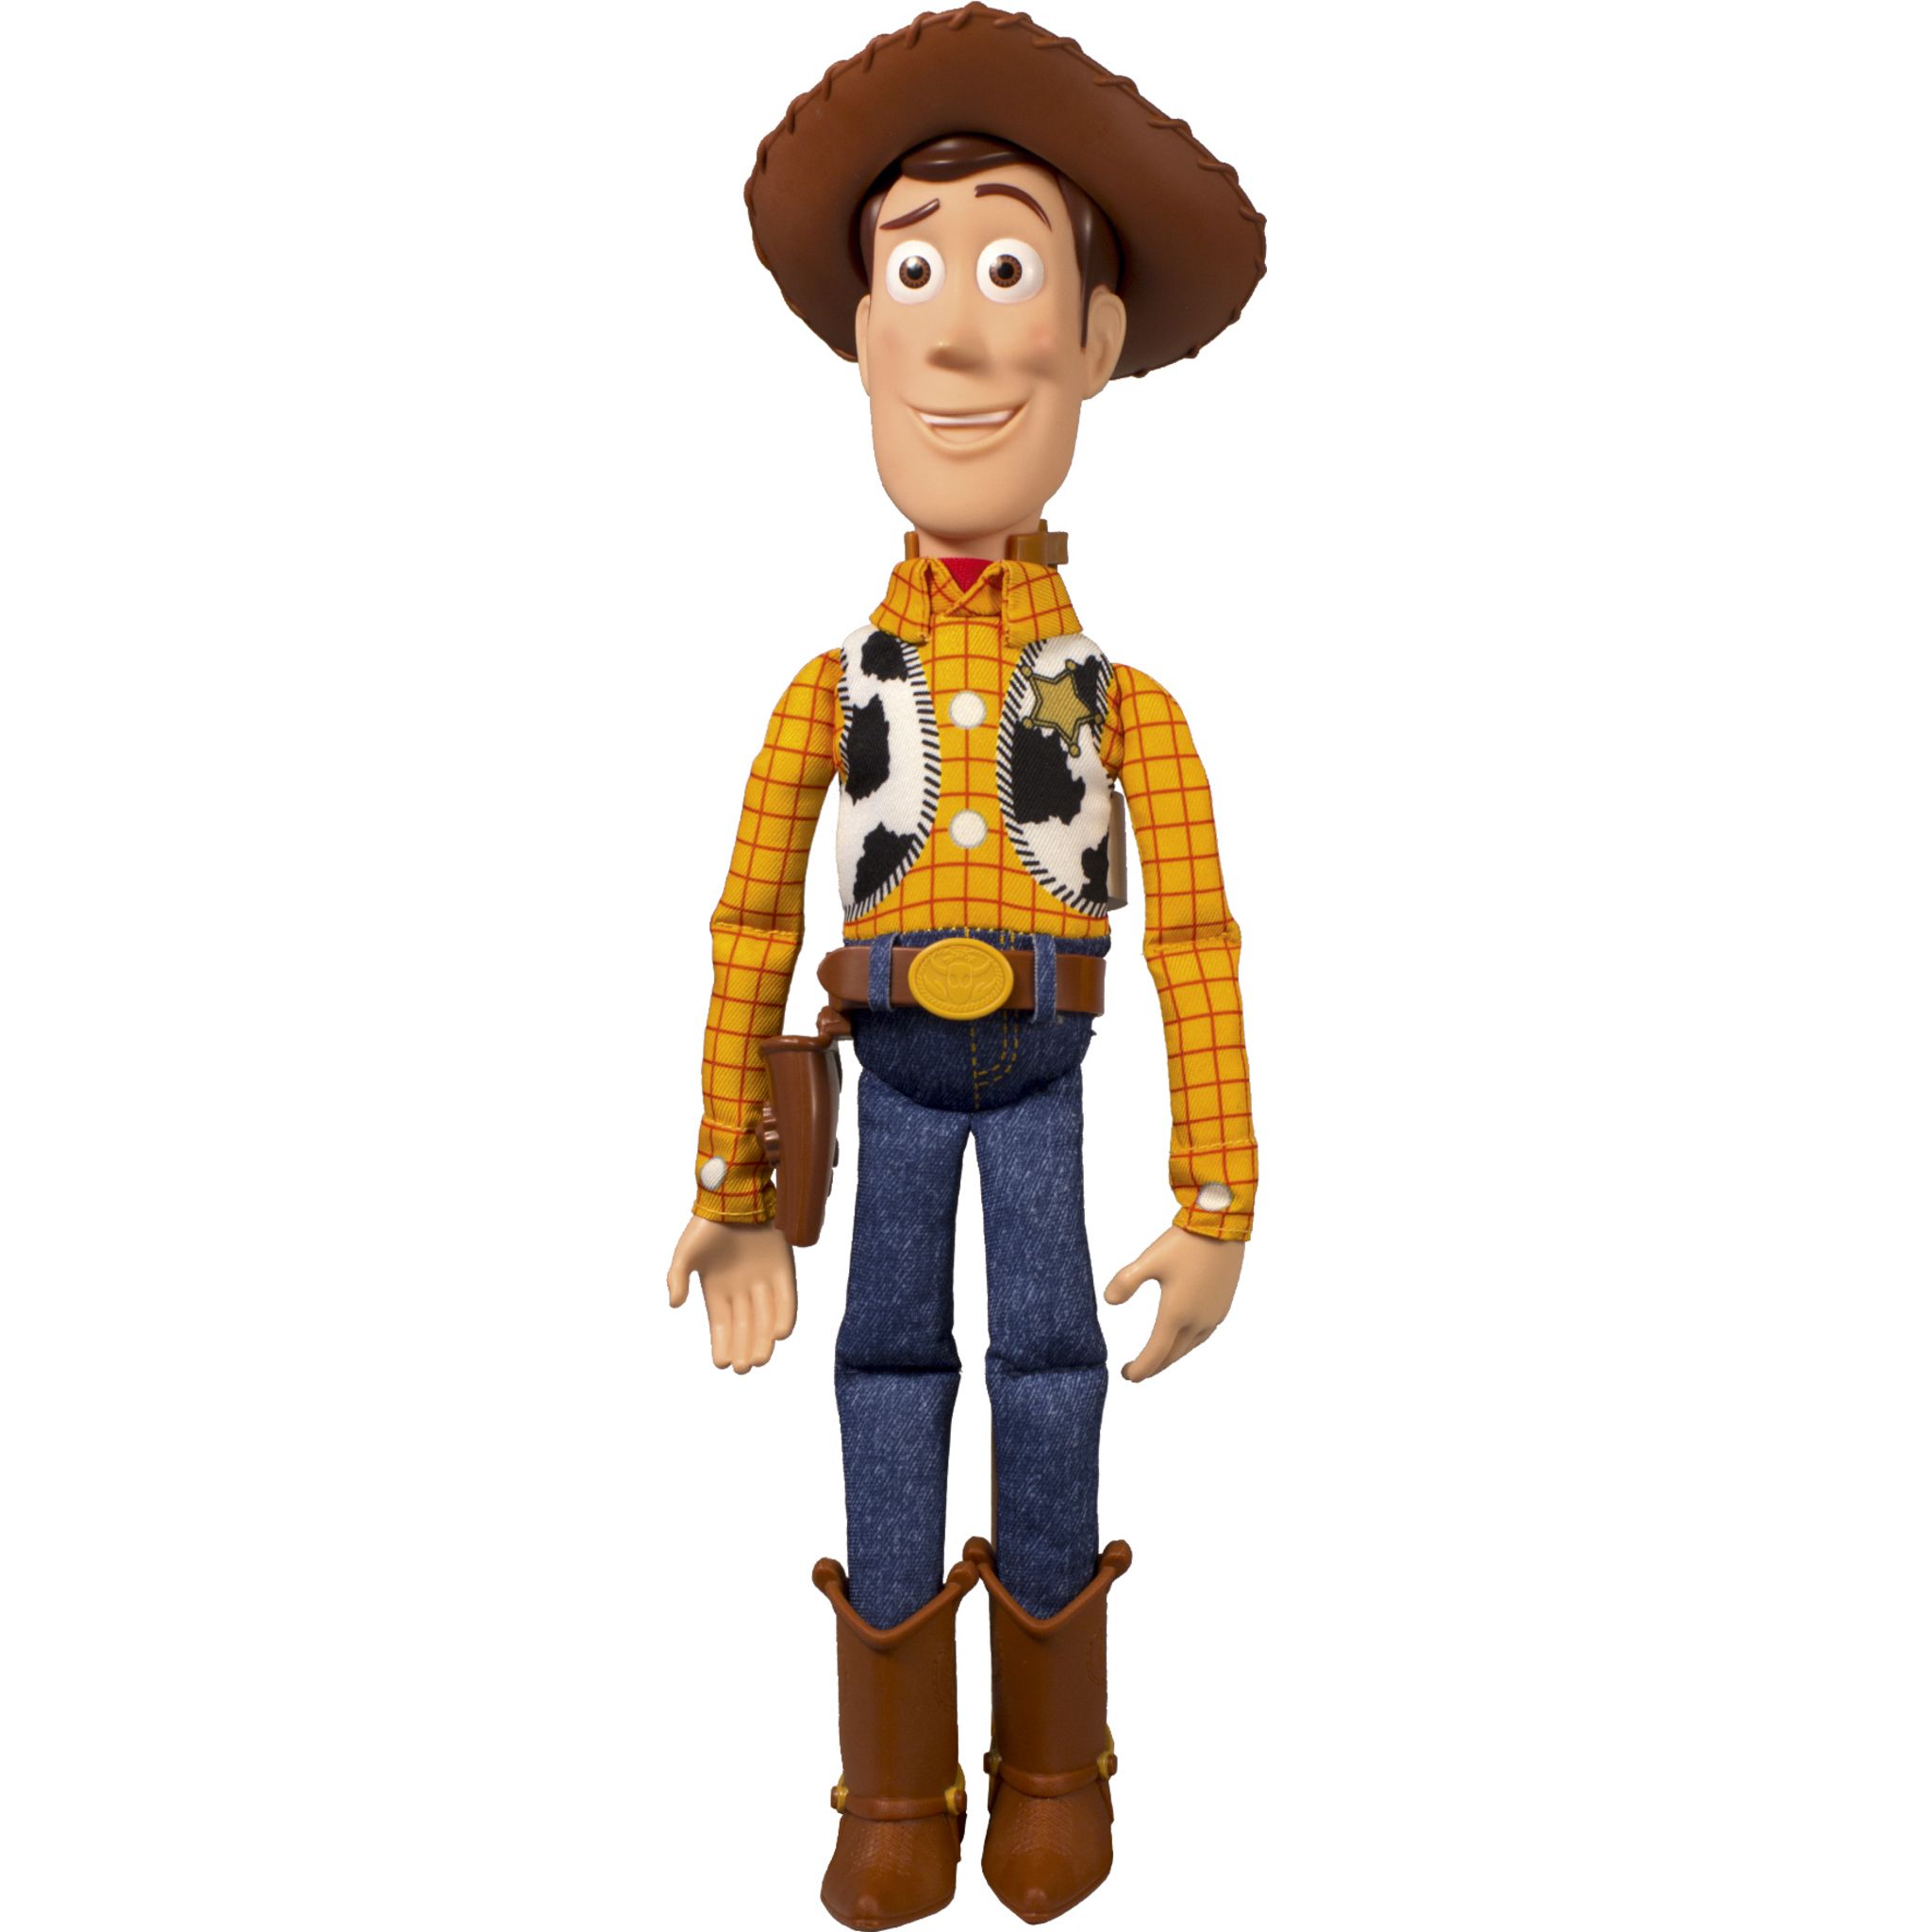 Figurine d'action parlante Woody toy story anglais fonctionne